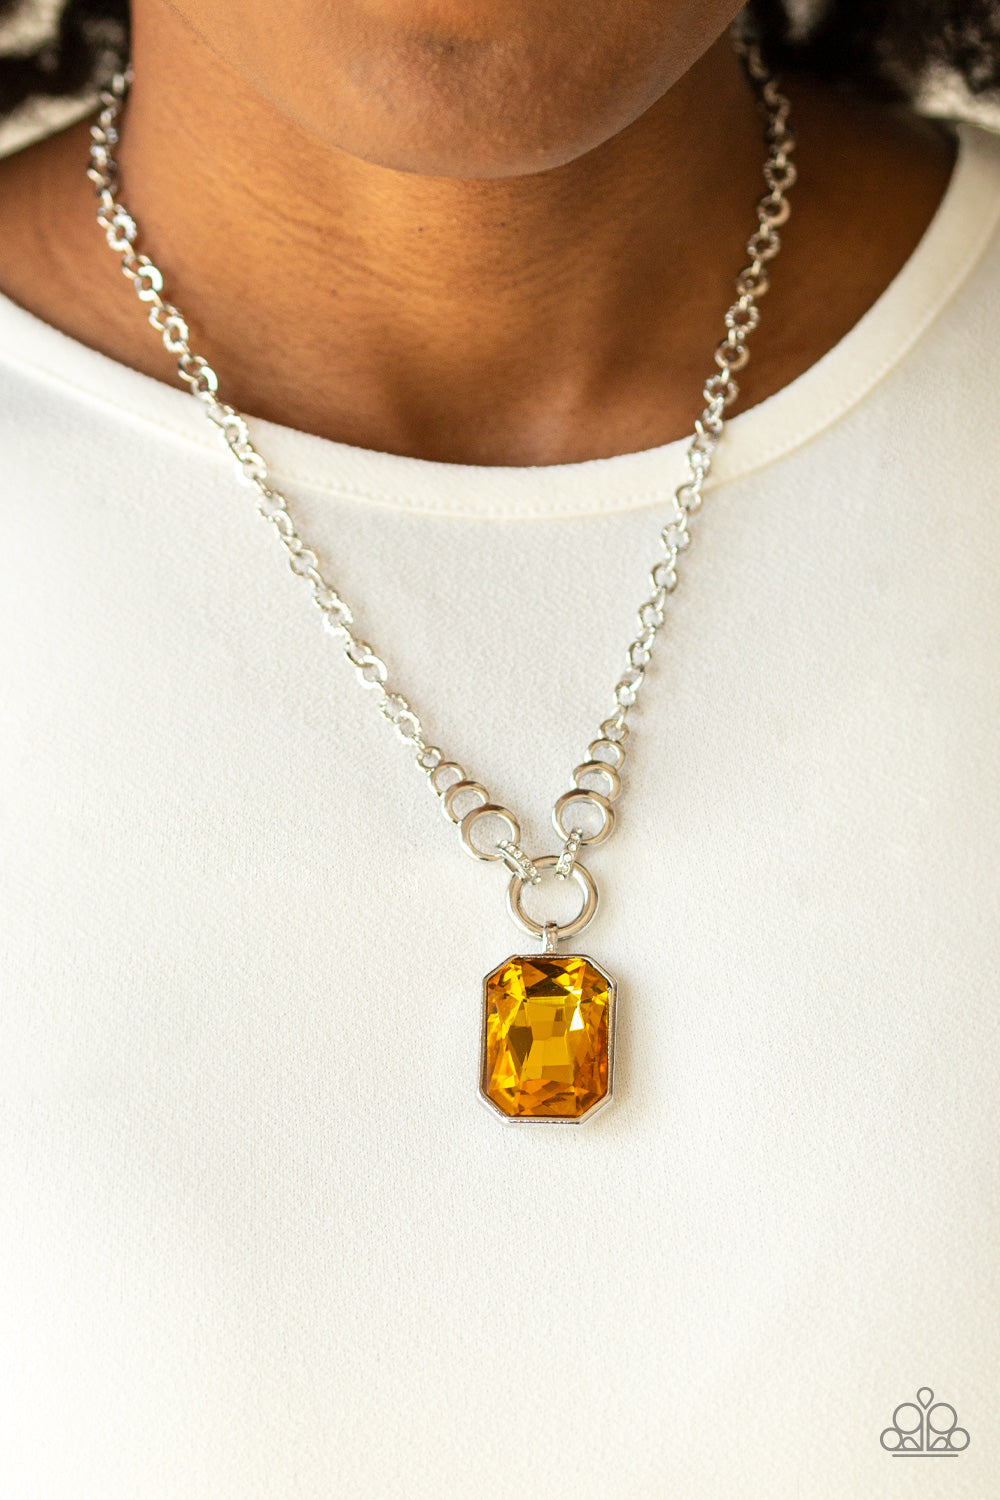 QUEEN BLING -  YELLOWN NECKLACE